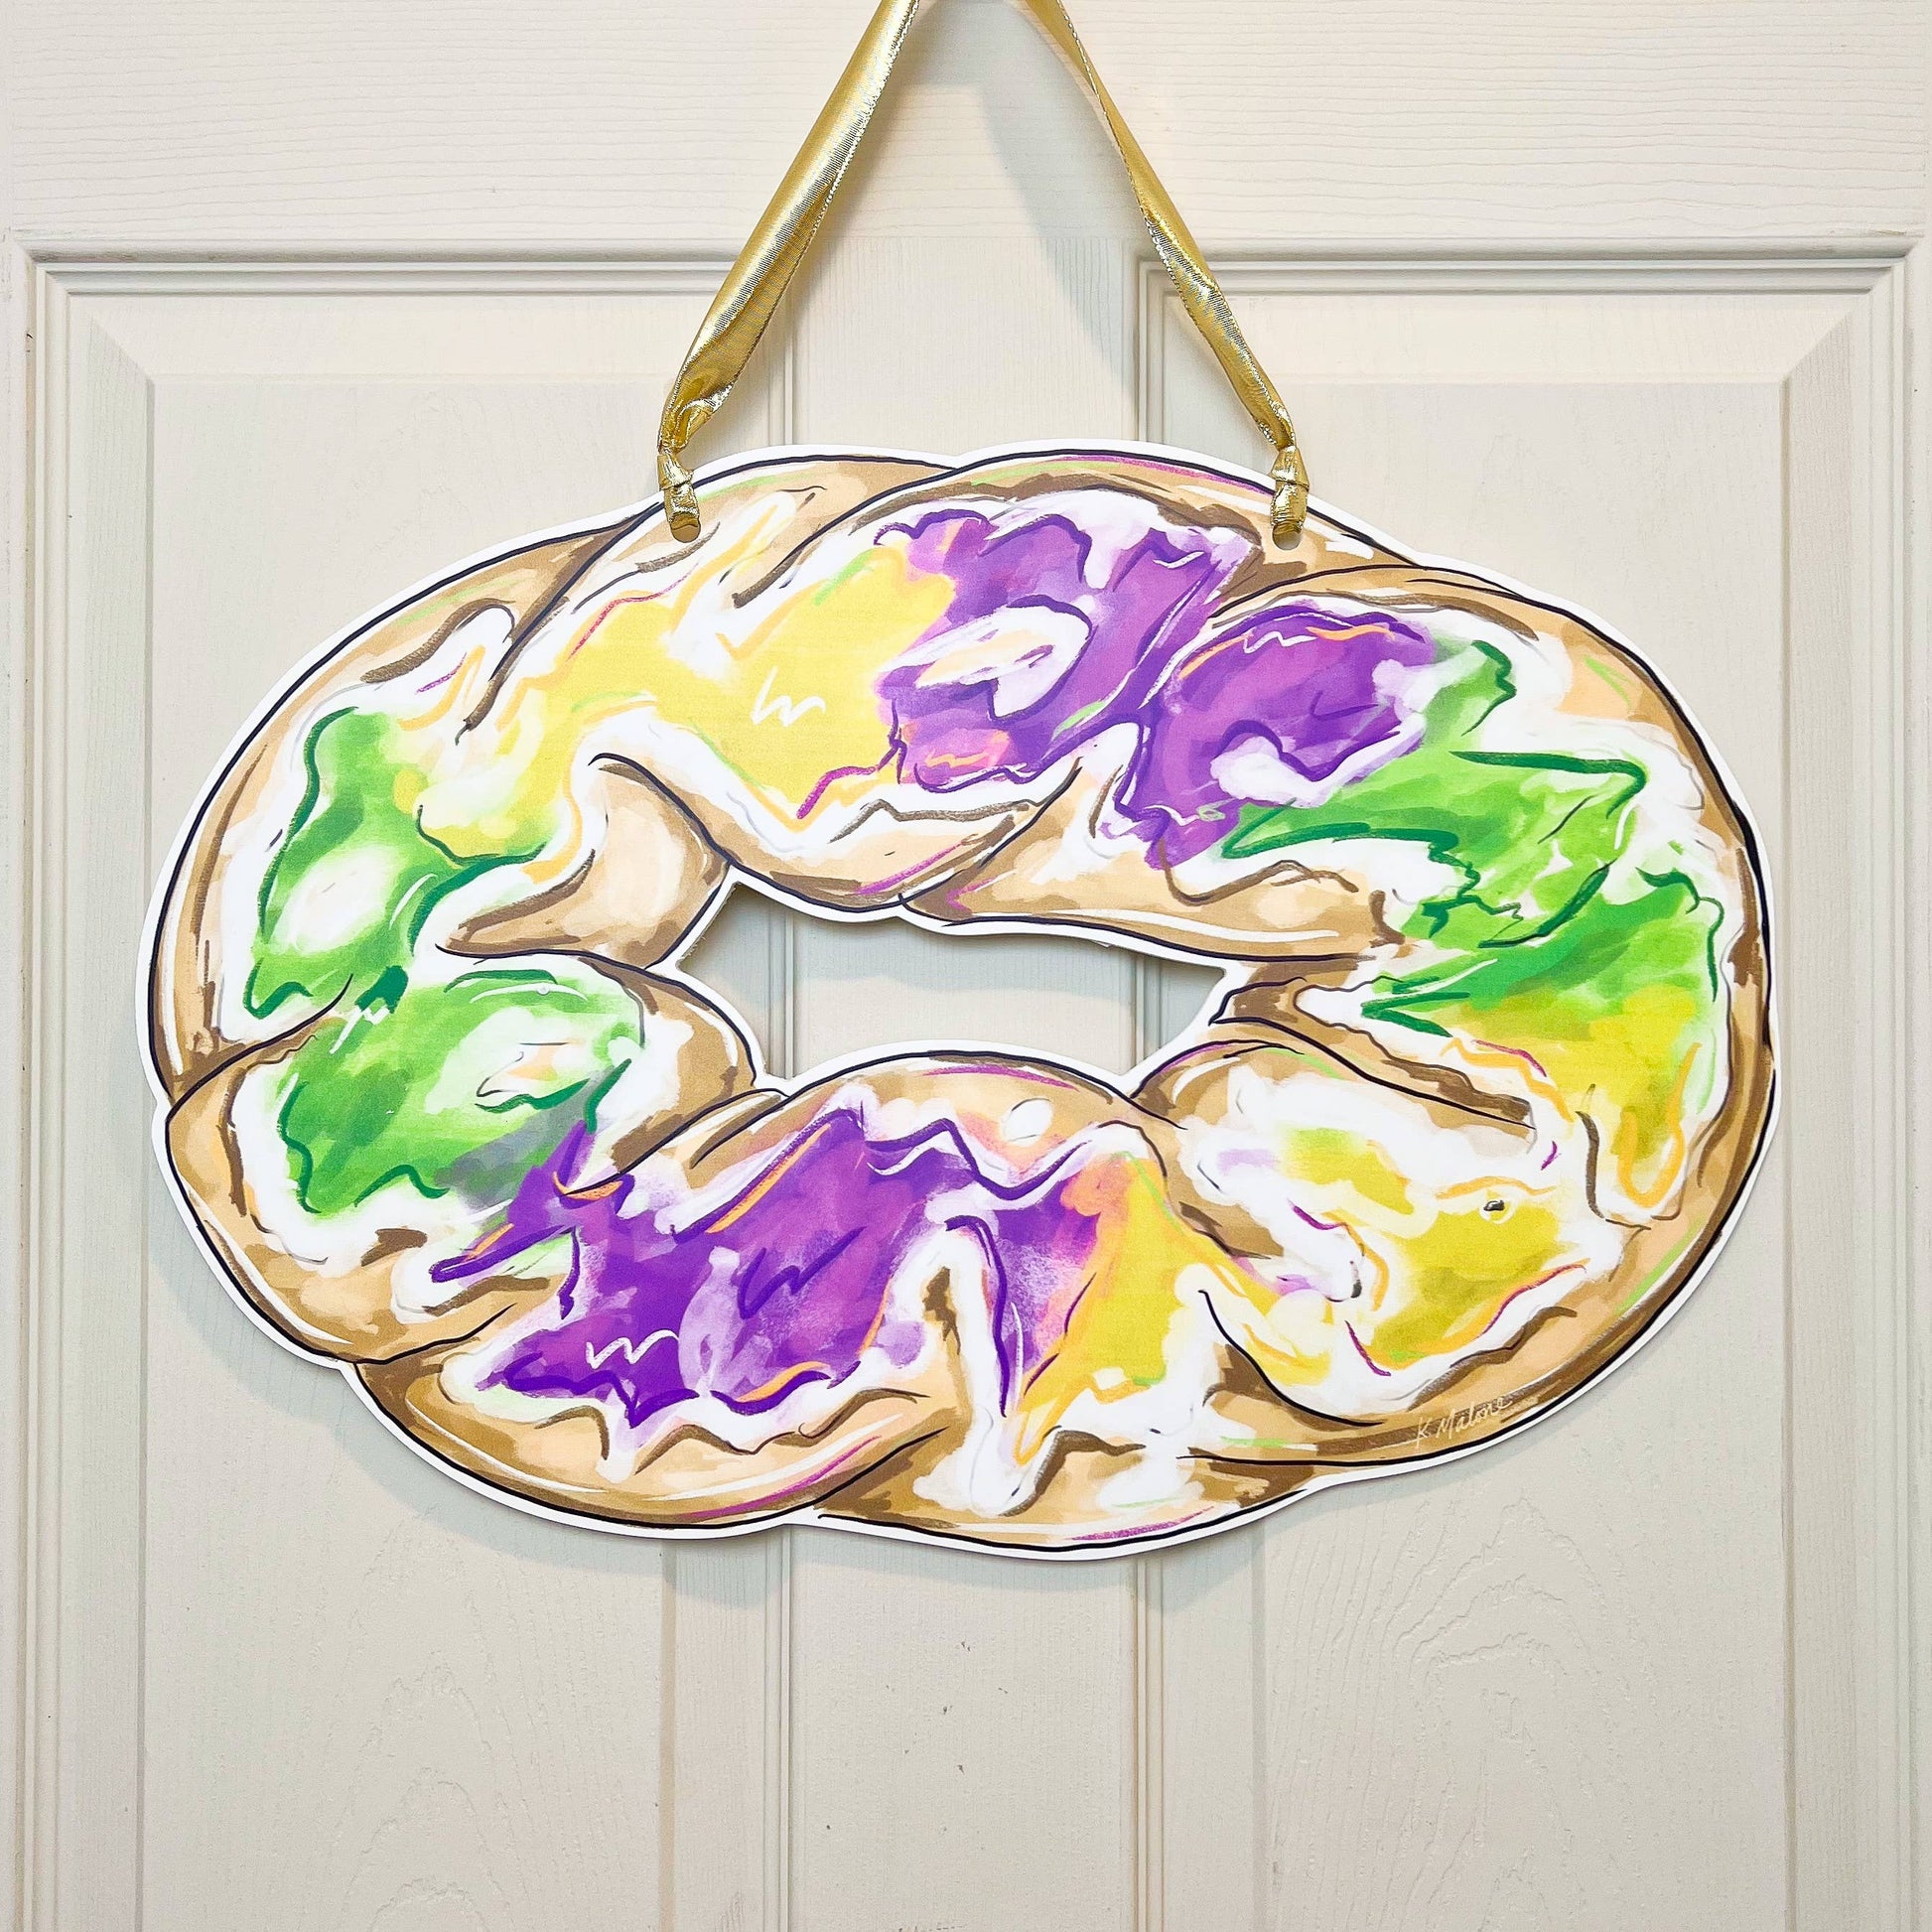 Home Malone Door Hanger: Bright King Cake – Pop & Pour Party Co